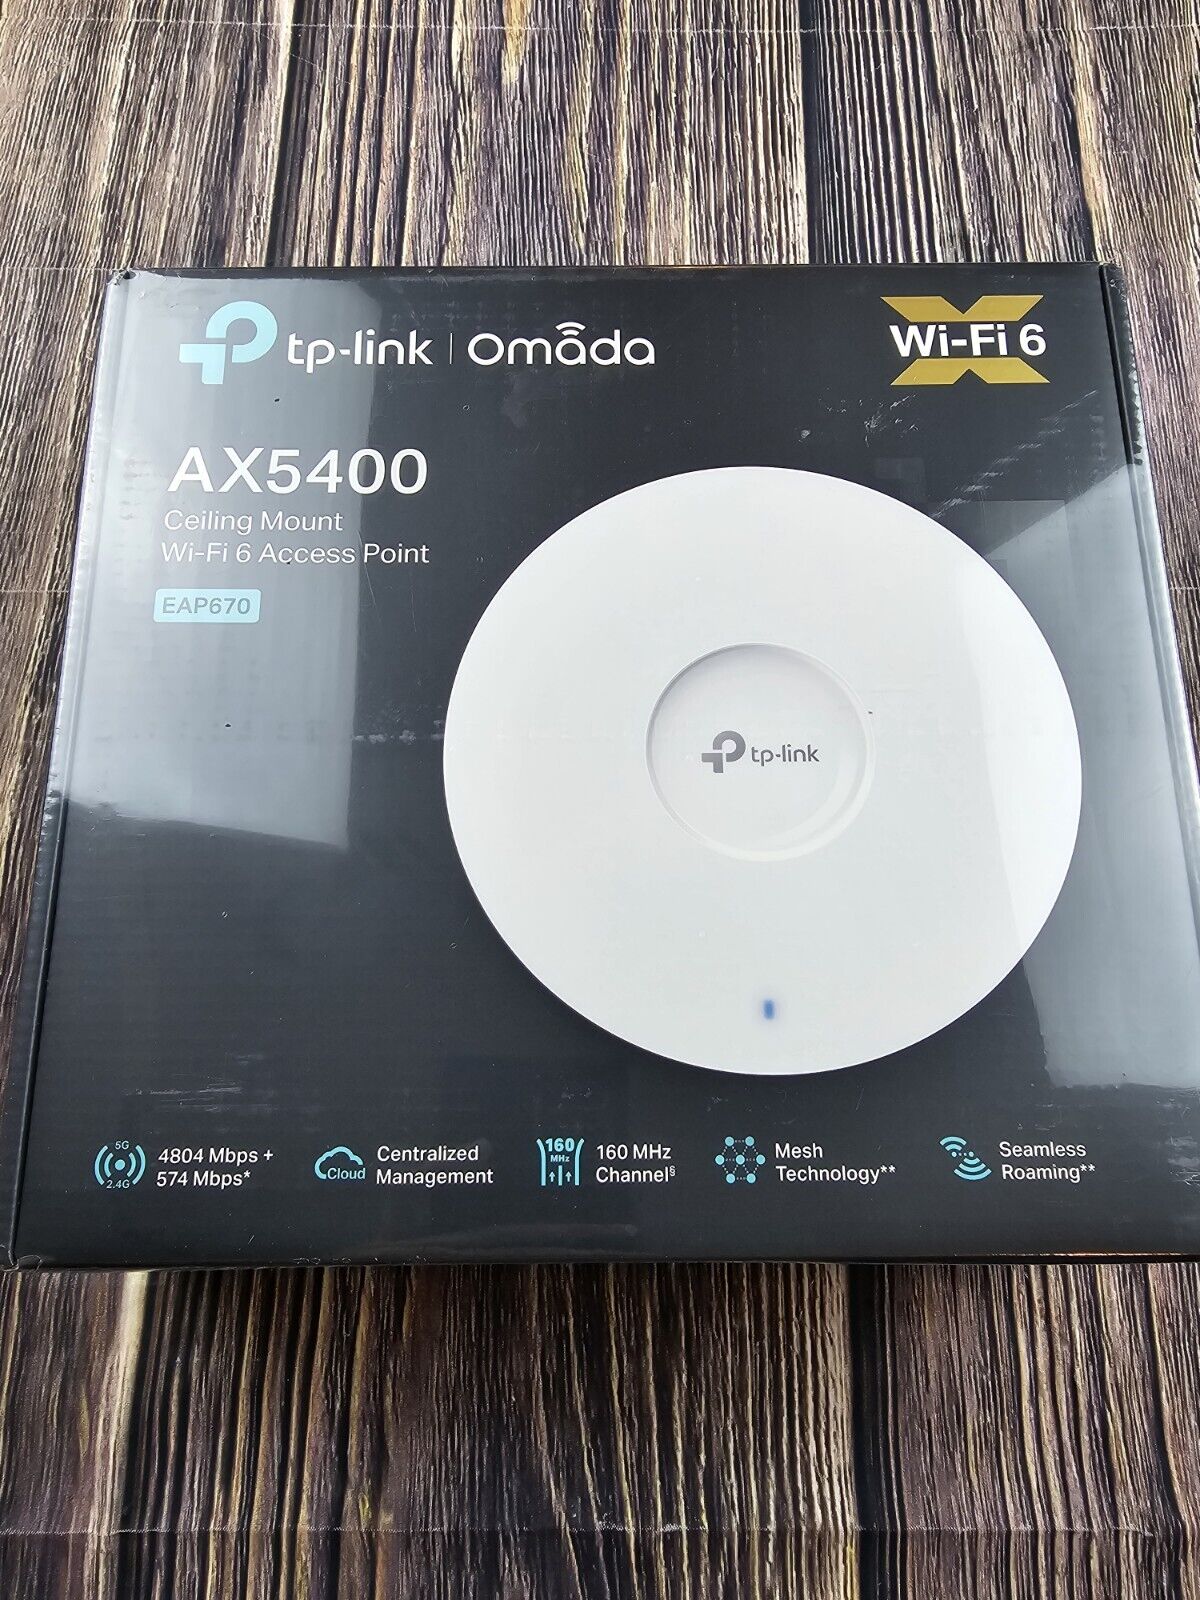 TP-LINK EAP670 AX5400 WiFi 6 Ceiling Mount PoE+ Wireless Access Point - White